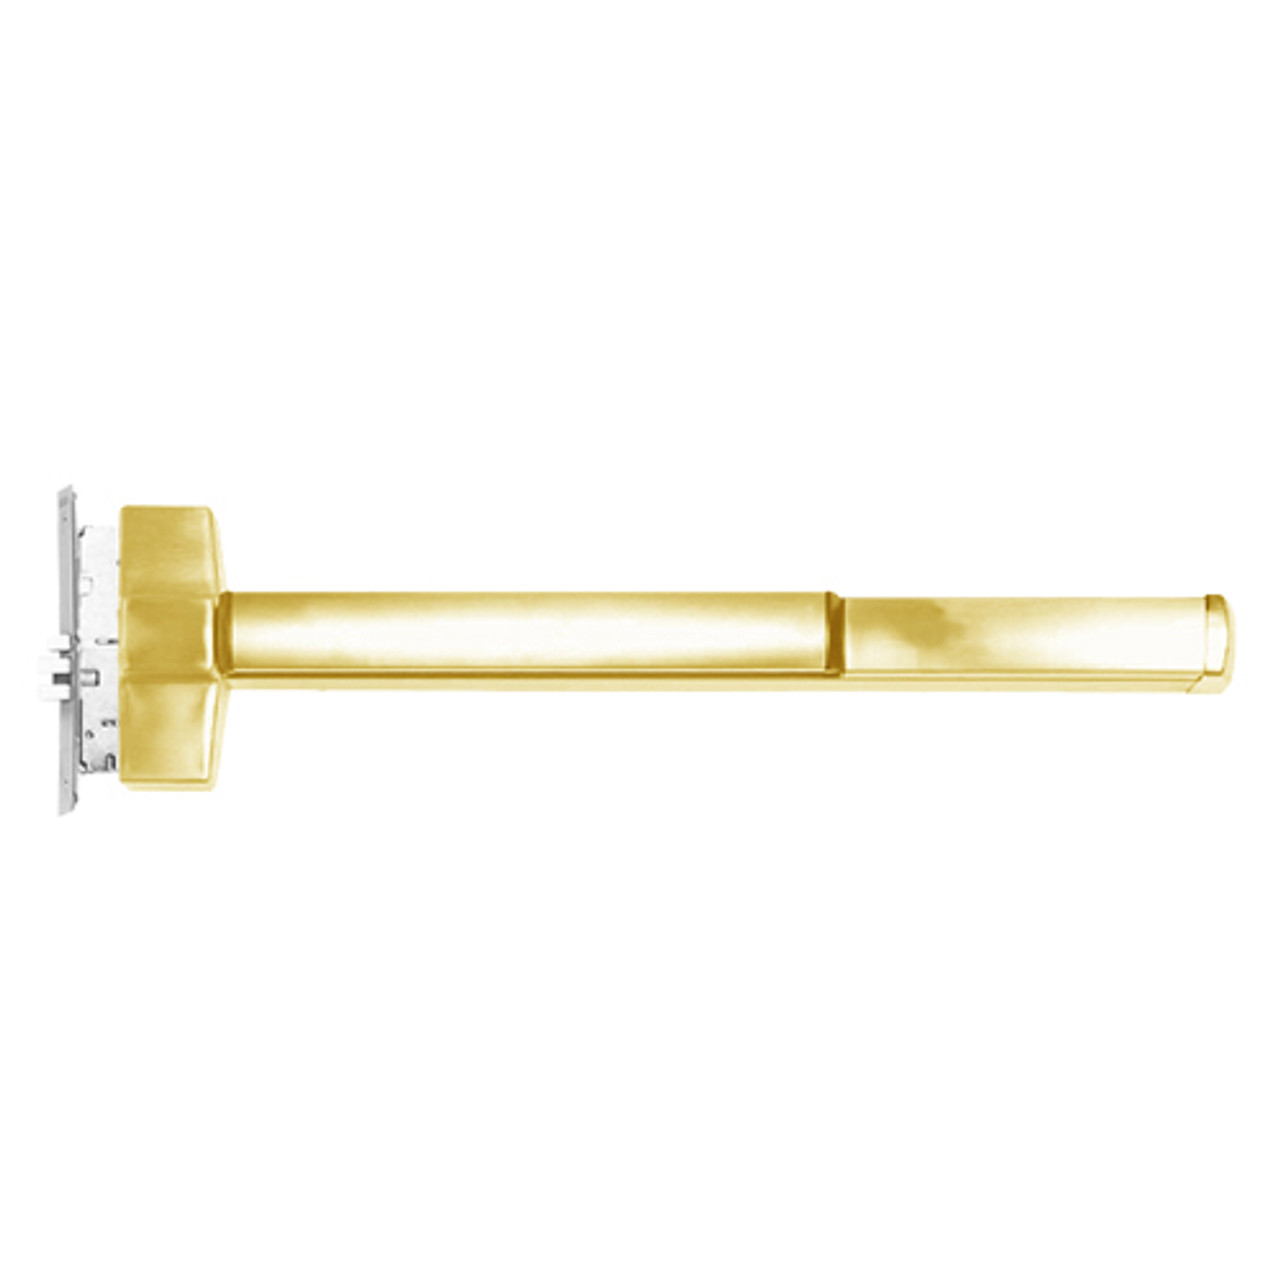 ED5657AL-605-W048-MELR-M92-LHR Corbin ED5600 Series Fire Rated Mortise Exit Device with Motorized Latch Retraction and Touchbar Monitoring in Bright Brass Finish